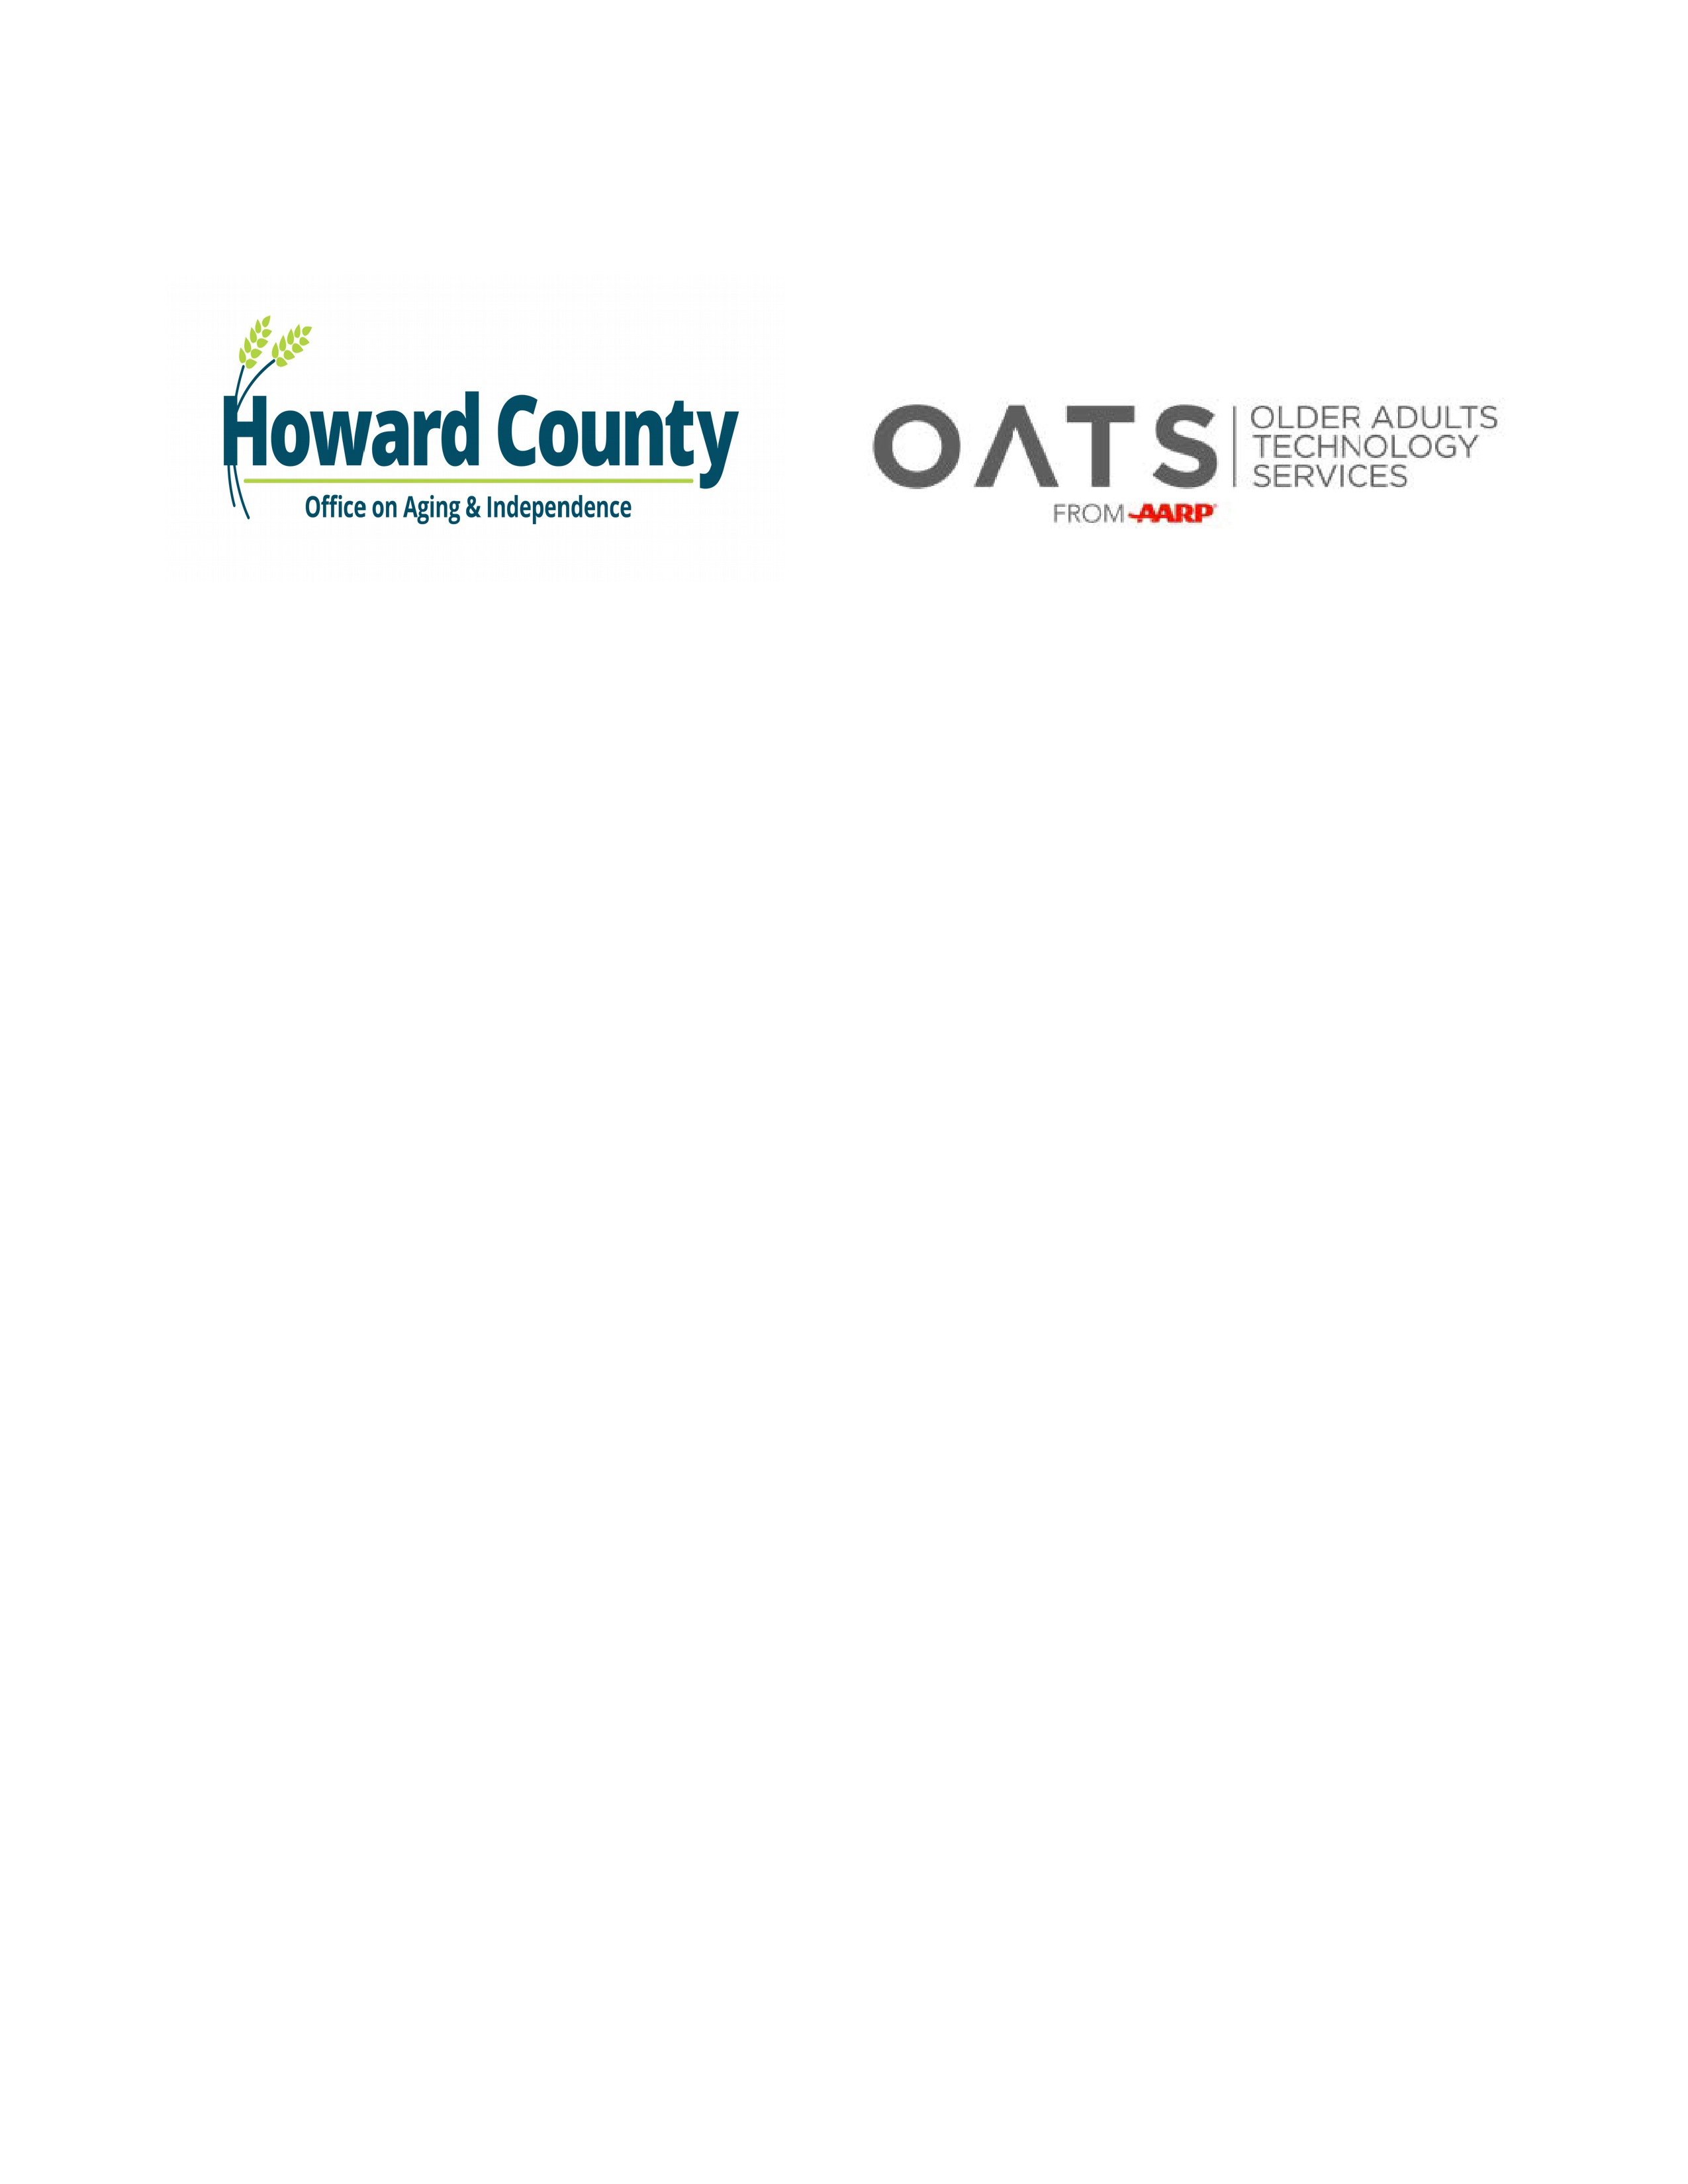 Logos for the Howard County Office on Aging and Indepence, and the Older Adults Technology Service (OATS) from AAPR